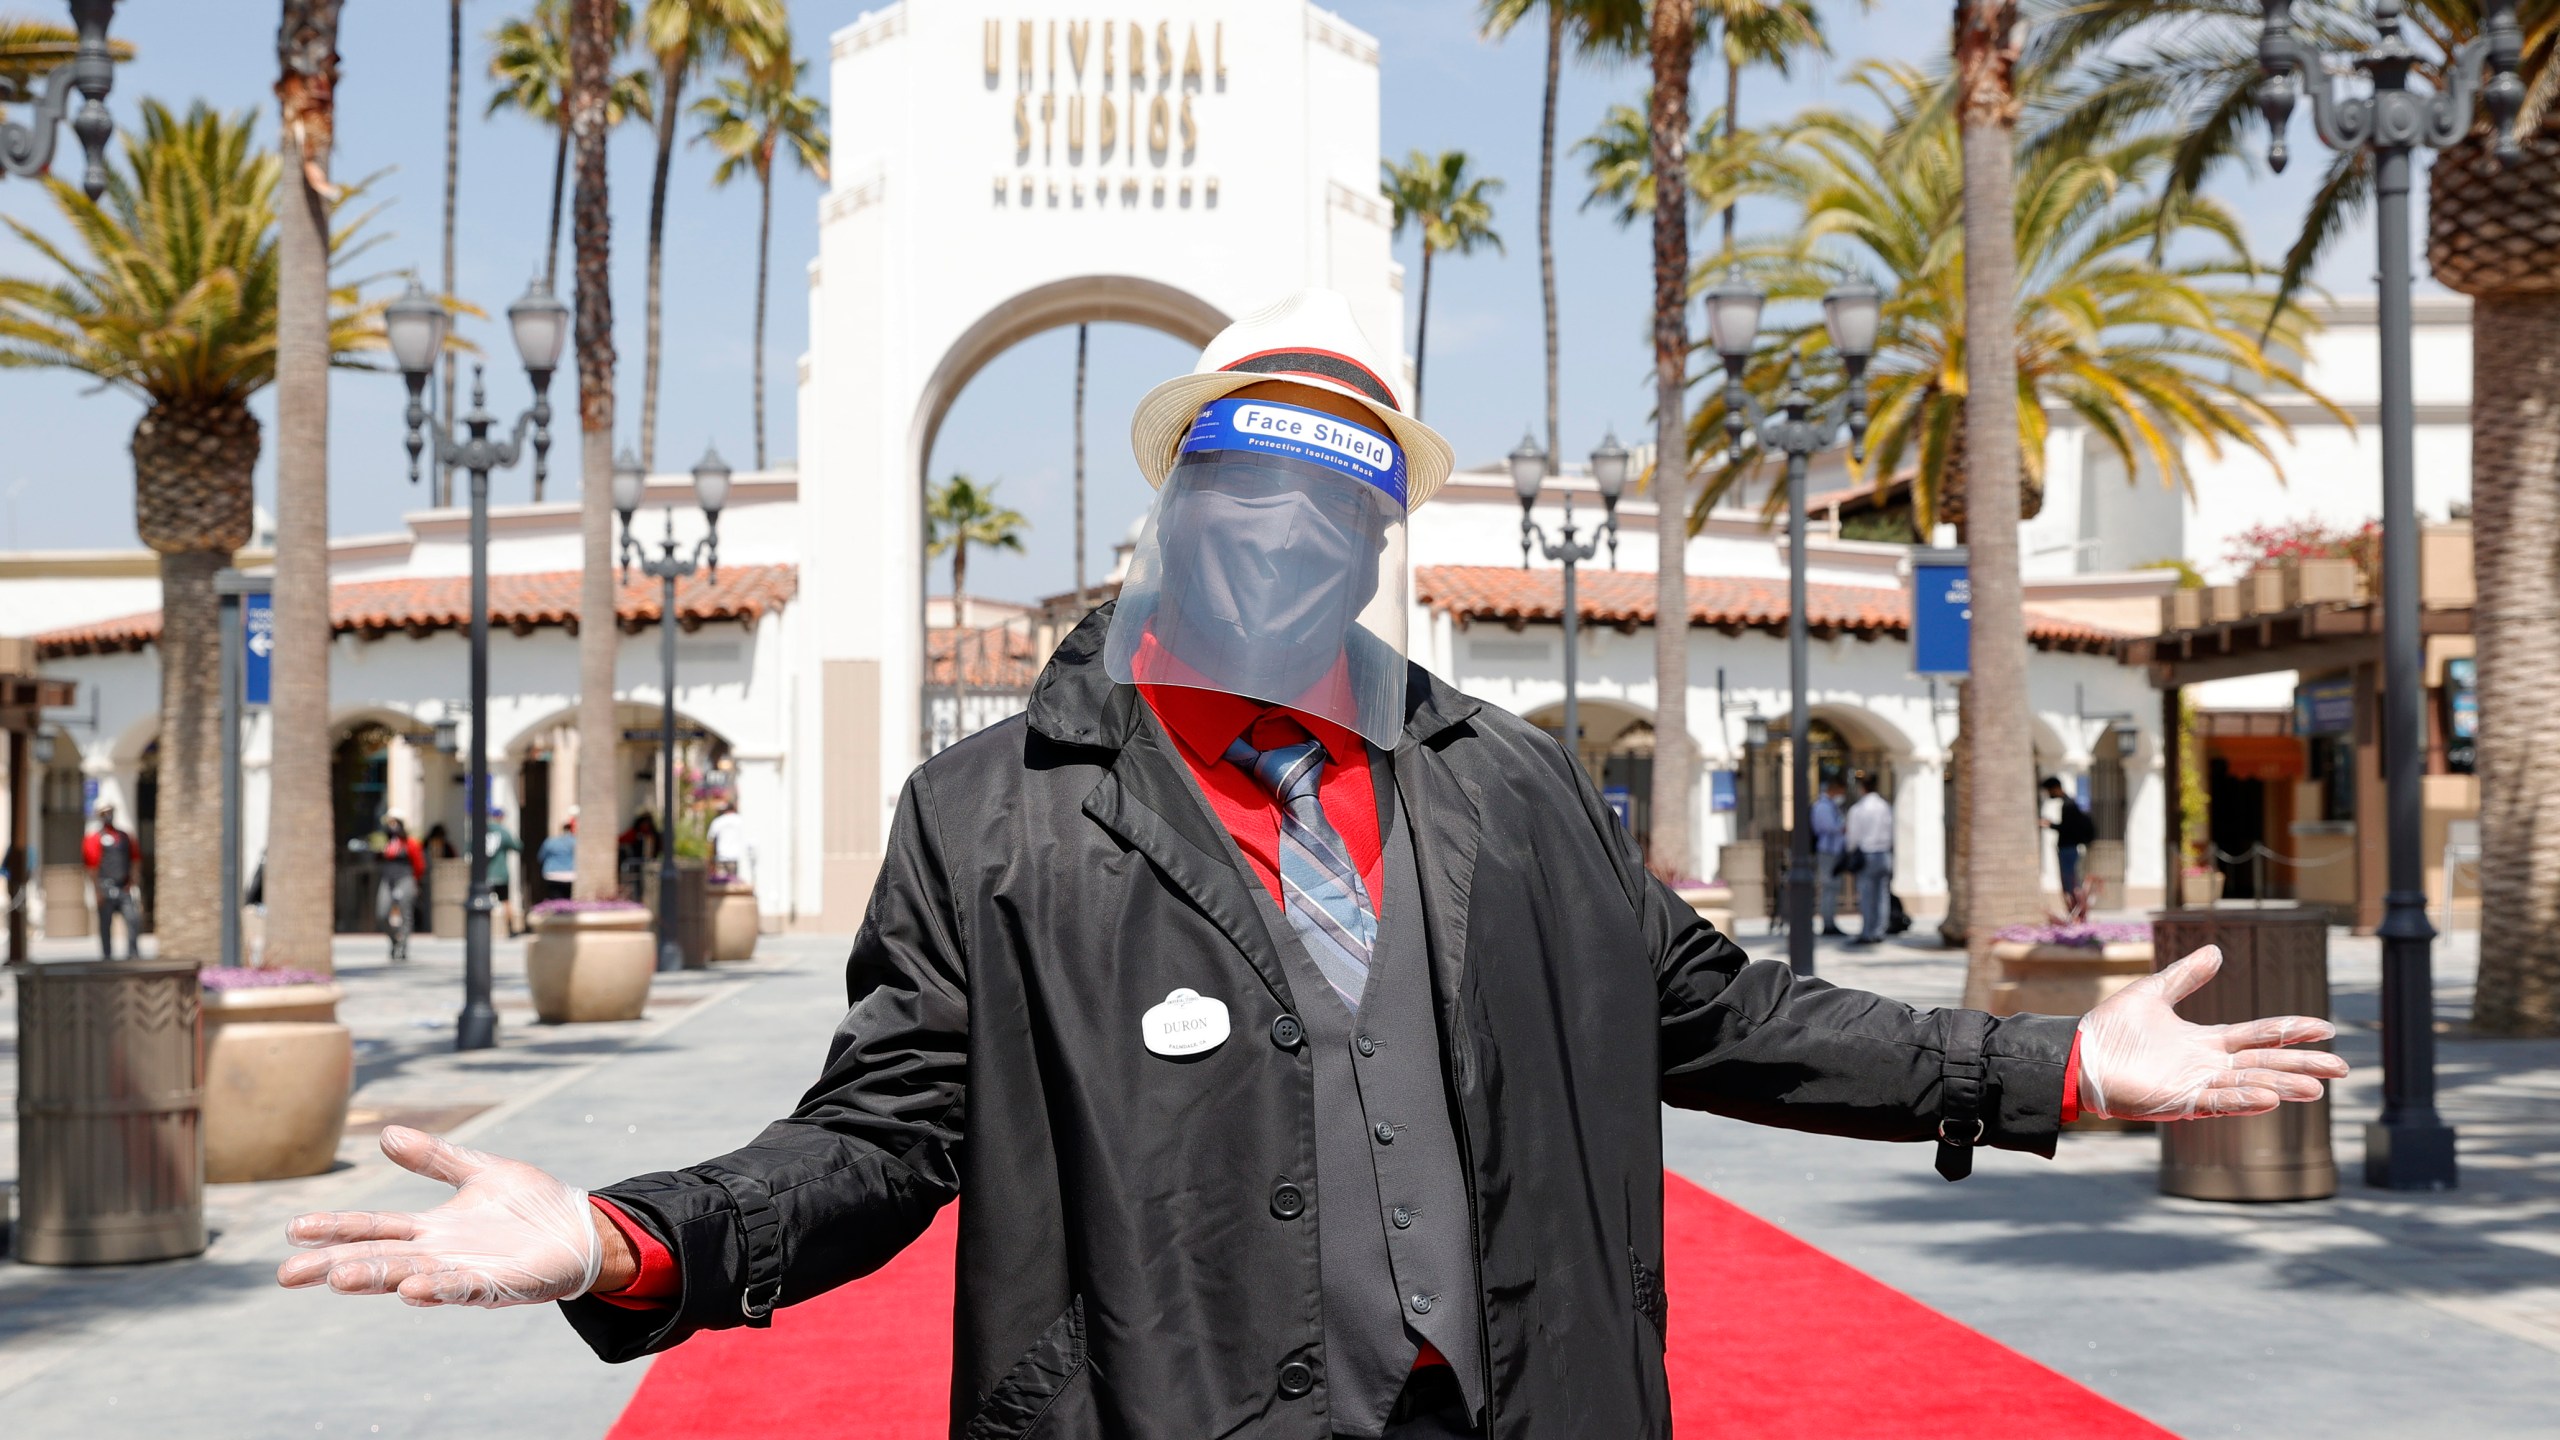 An employee is seen ahead of the grand reopening of Universal Studios Hollywood on April 15, 2021, in Universal City, California. (Amy Sussman/Getty Images)